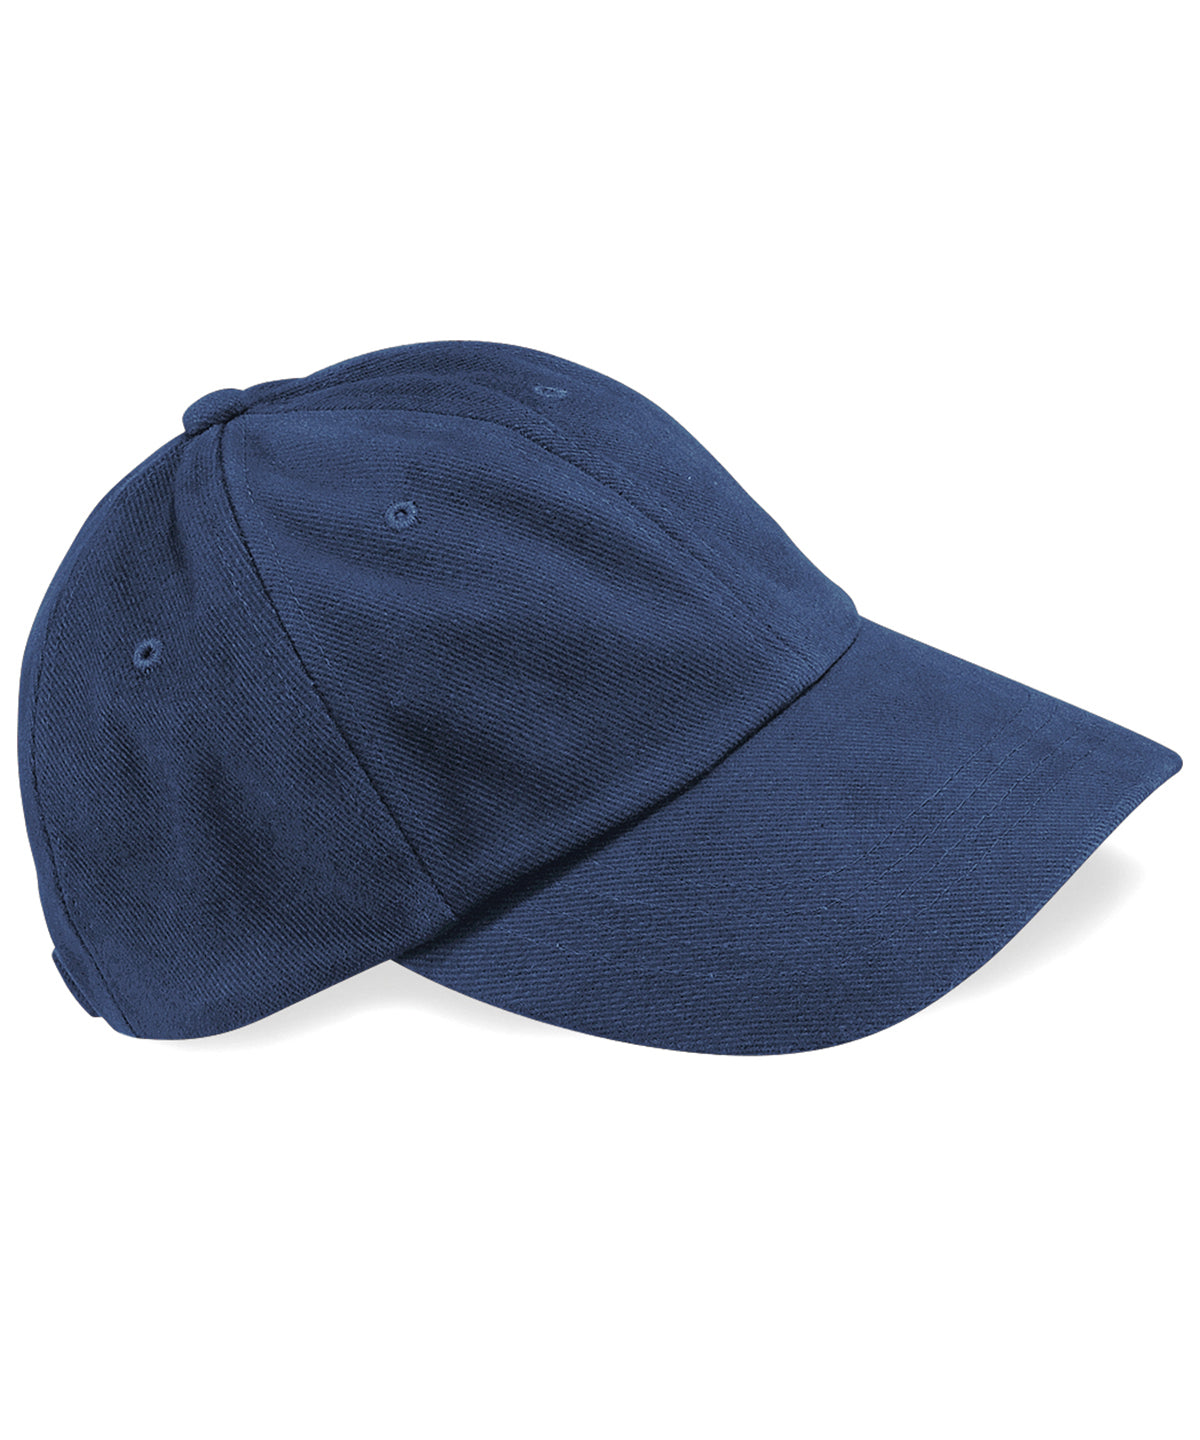 Personalised Caps - Navy Beechfield Low-profile heavy brushed cotton cap